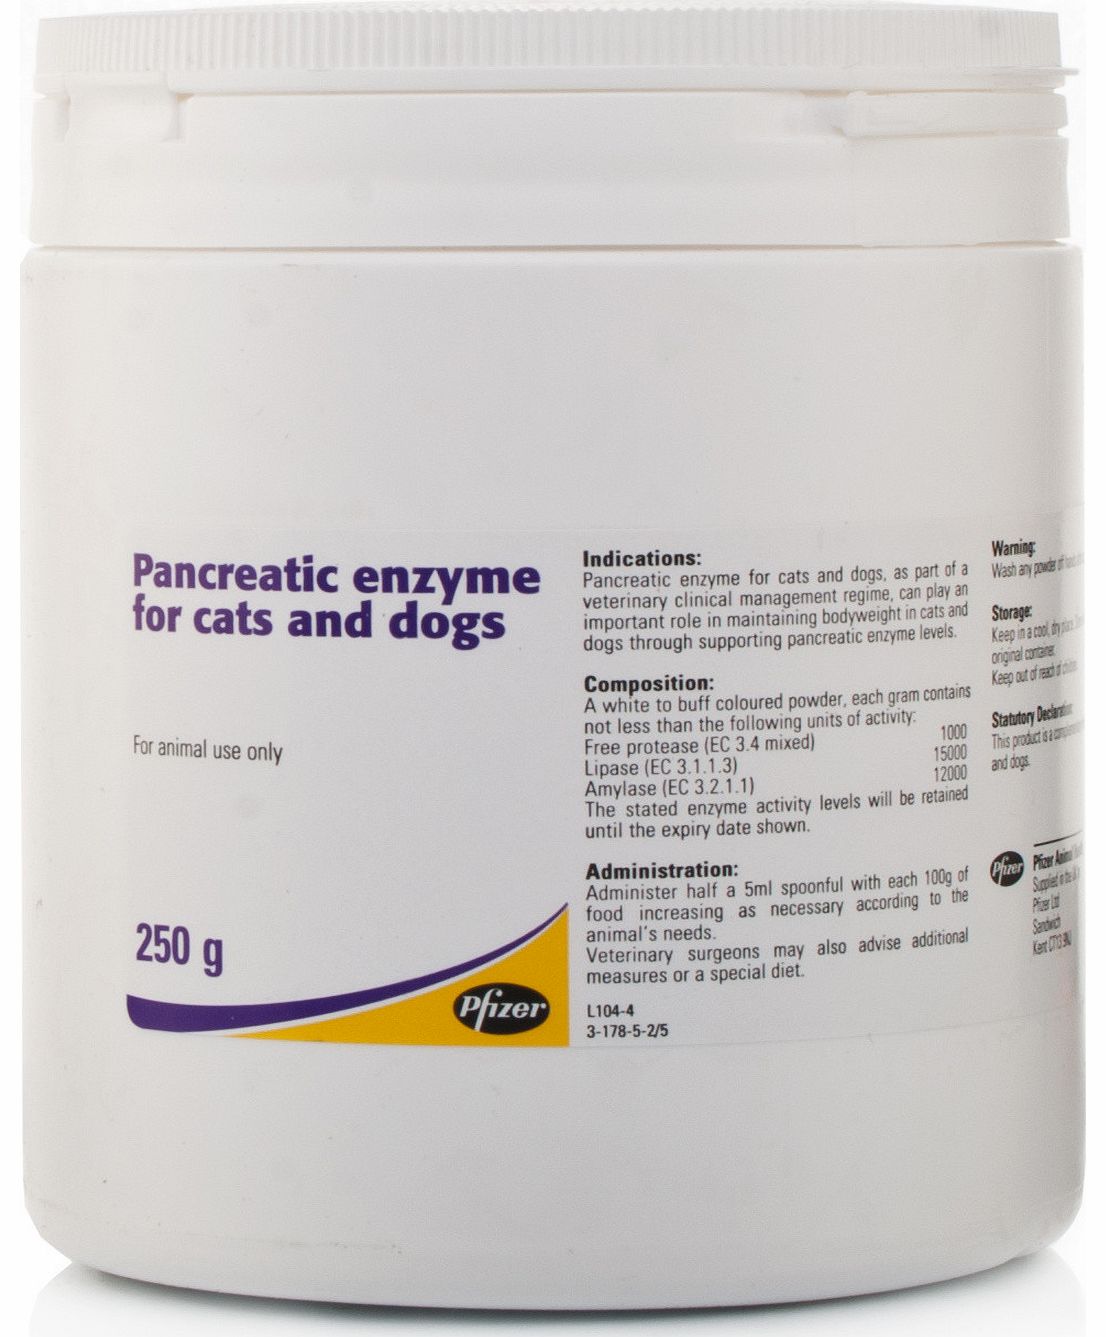 Pancreatic Enzyme For Cats and Dogs works by providing the cat or dog with the pancreatic enzymes that are normally secreted into the intestines but are lacking in cats and dogs with EDI. Please note that this product has a lower enzyme activity than